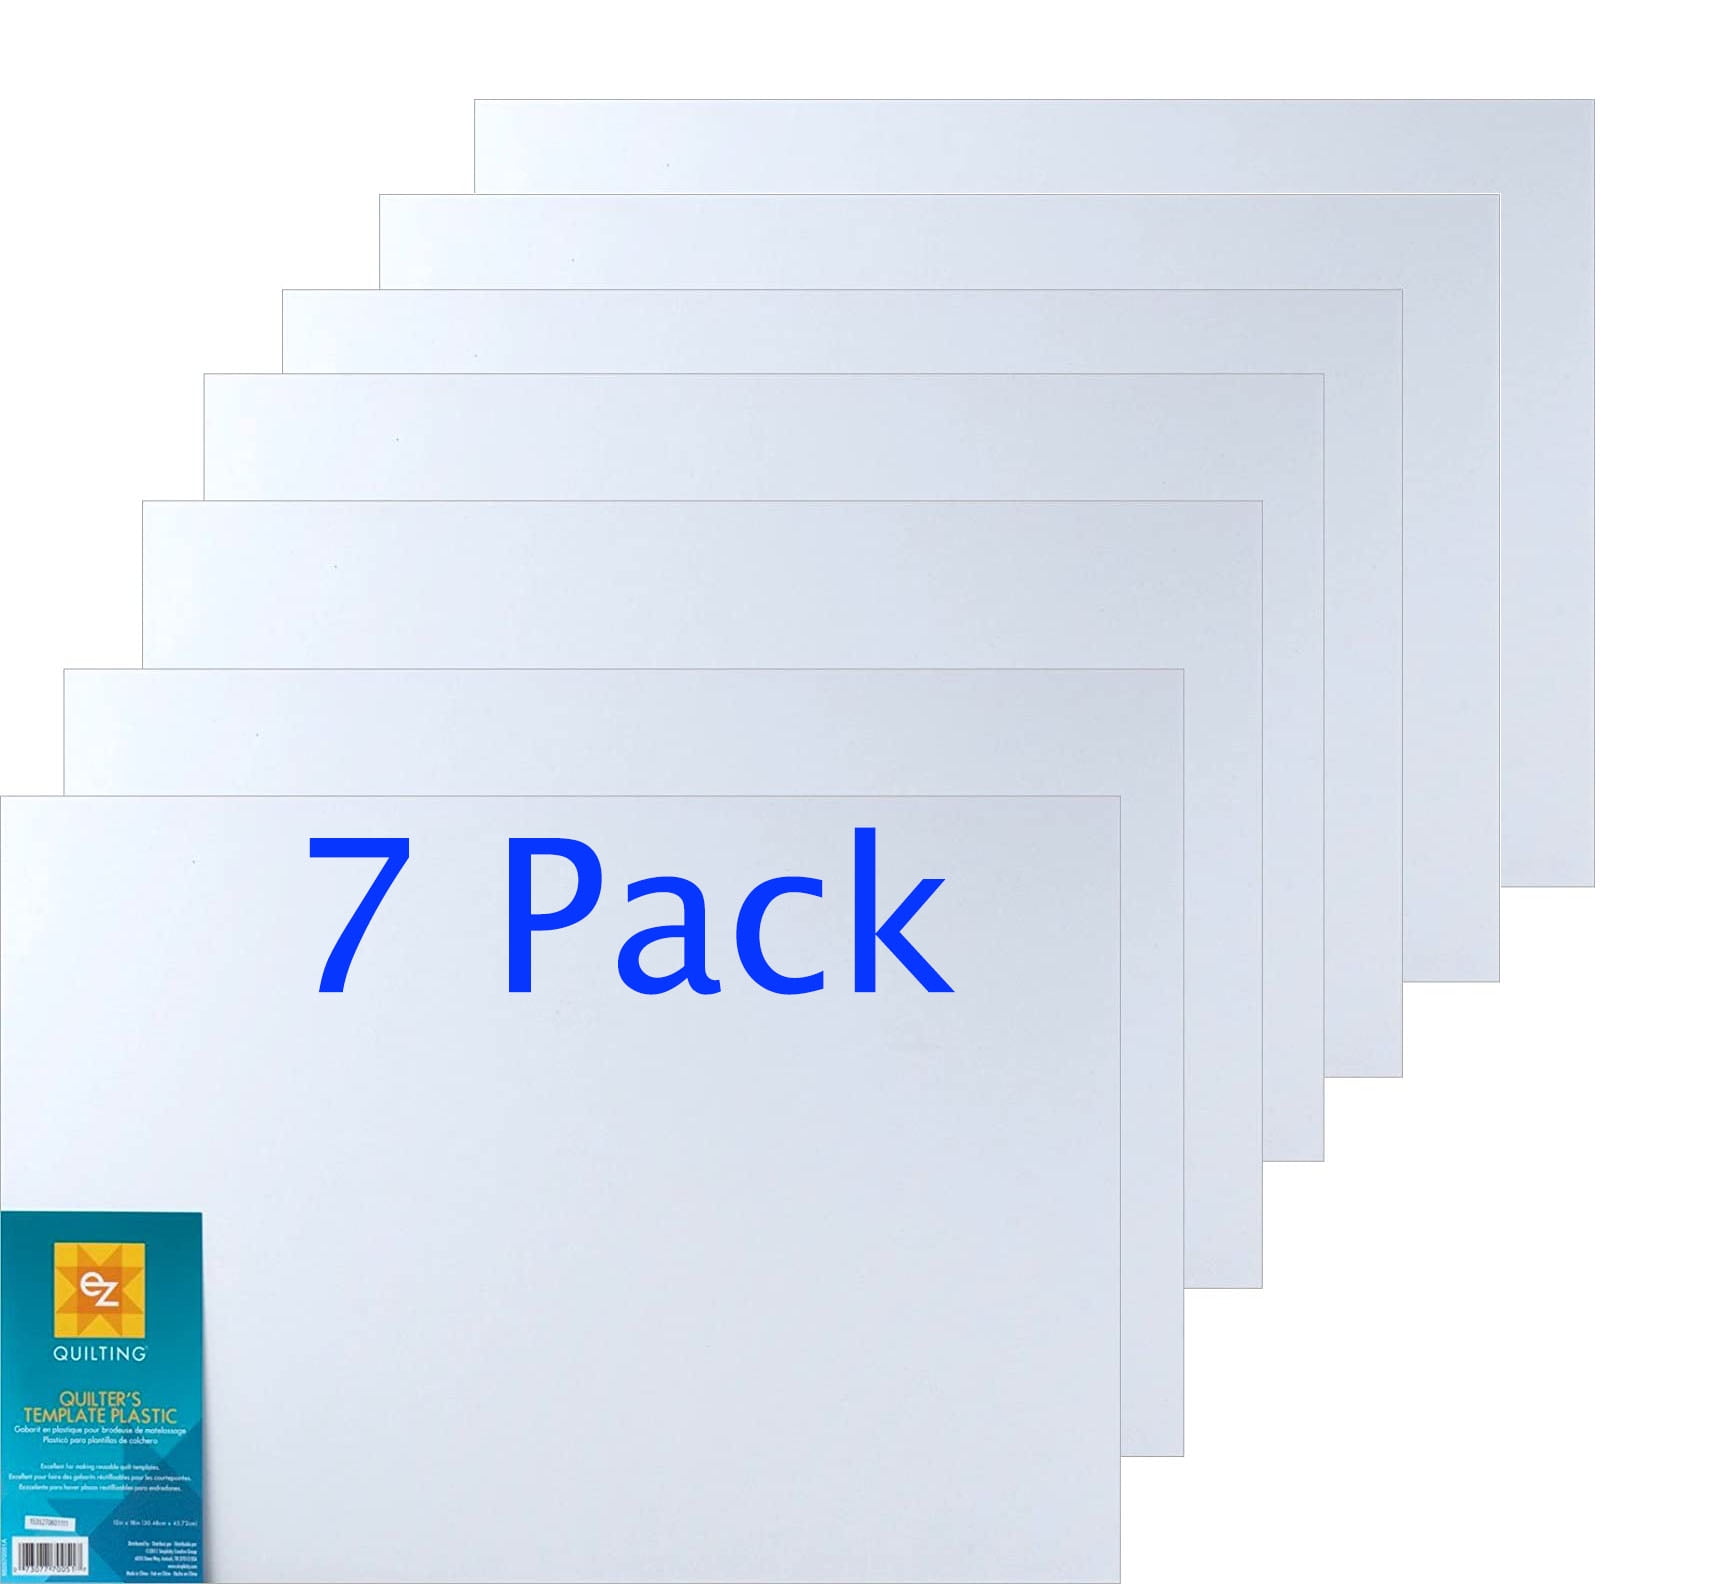 flagship-stores-bundle-of-ez-international-quilting-by-wrights-blank-plastic-template-sheets-3